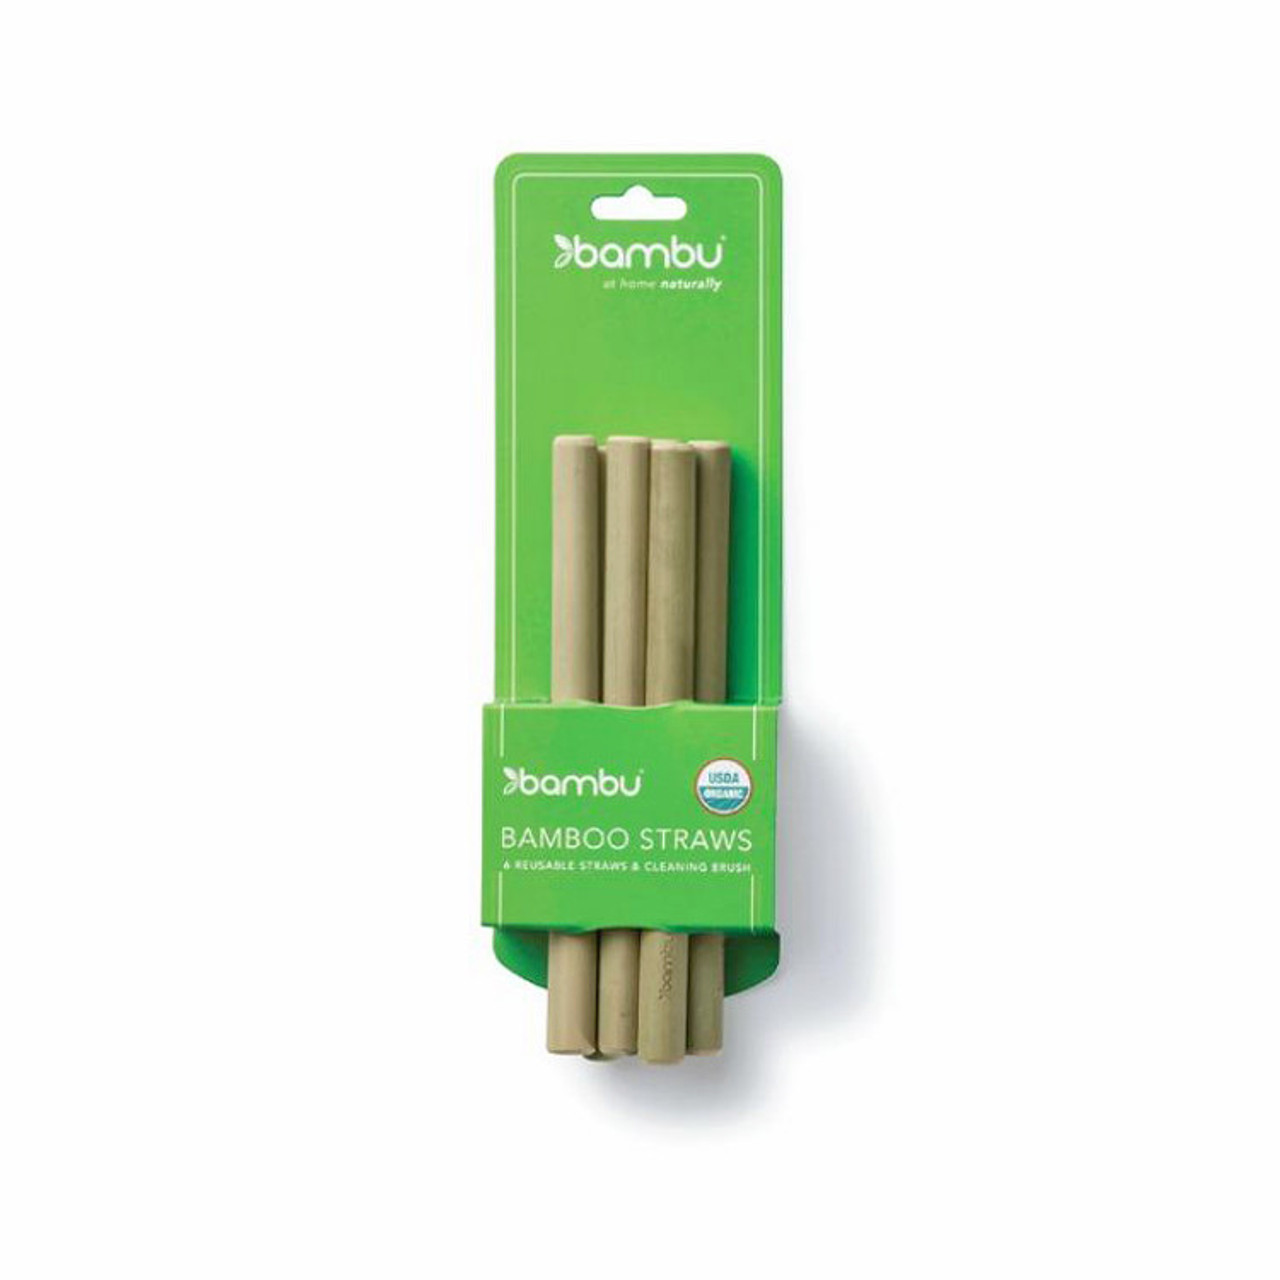 https://cdn11.bigcommerce.com/s-j602wc6a/images/stencil/1280x1280/products/7193/24981/short-bamboo-straws__28898.1527901254.jpg?c=2